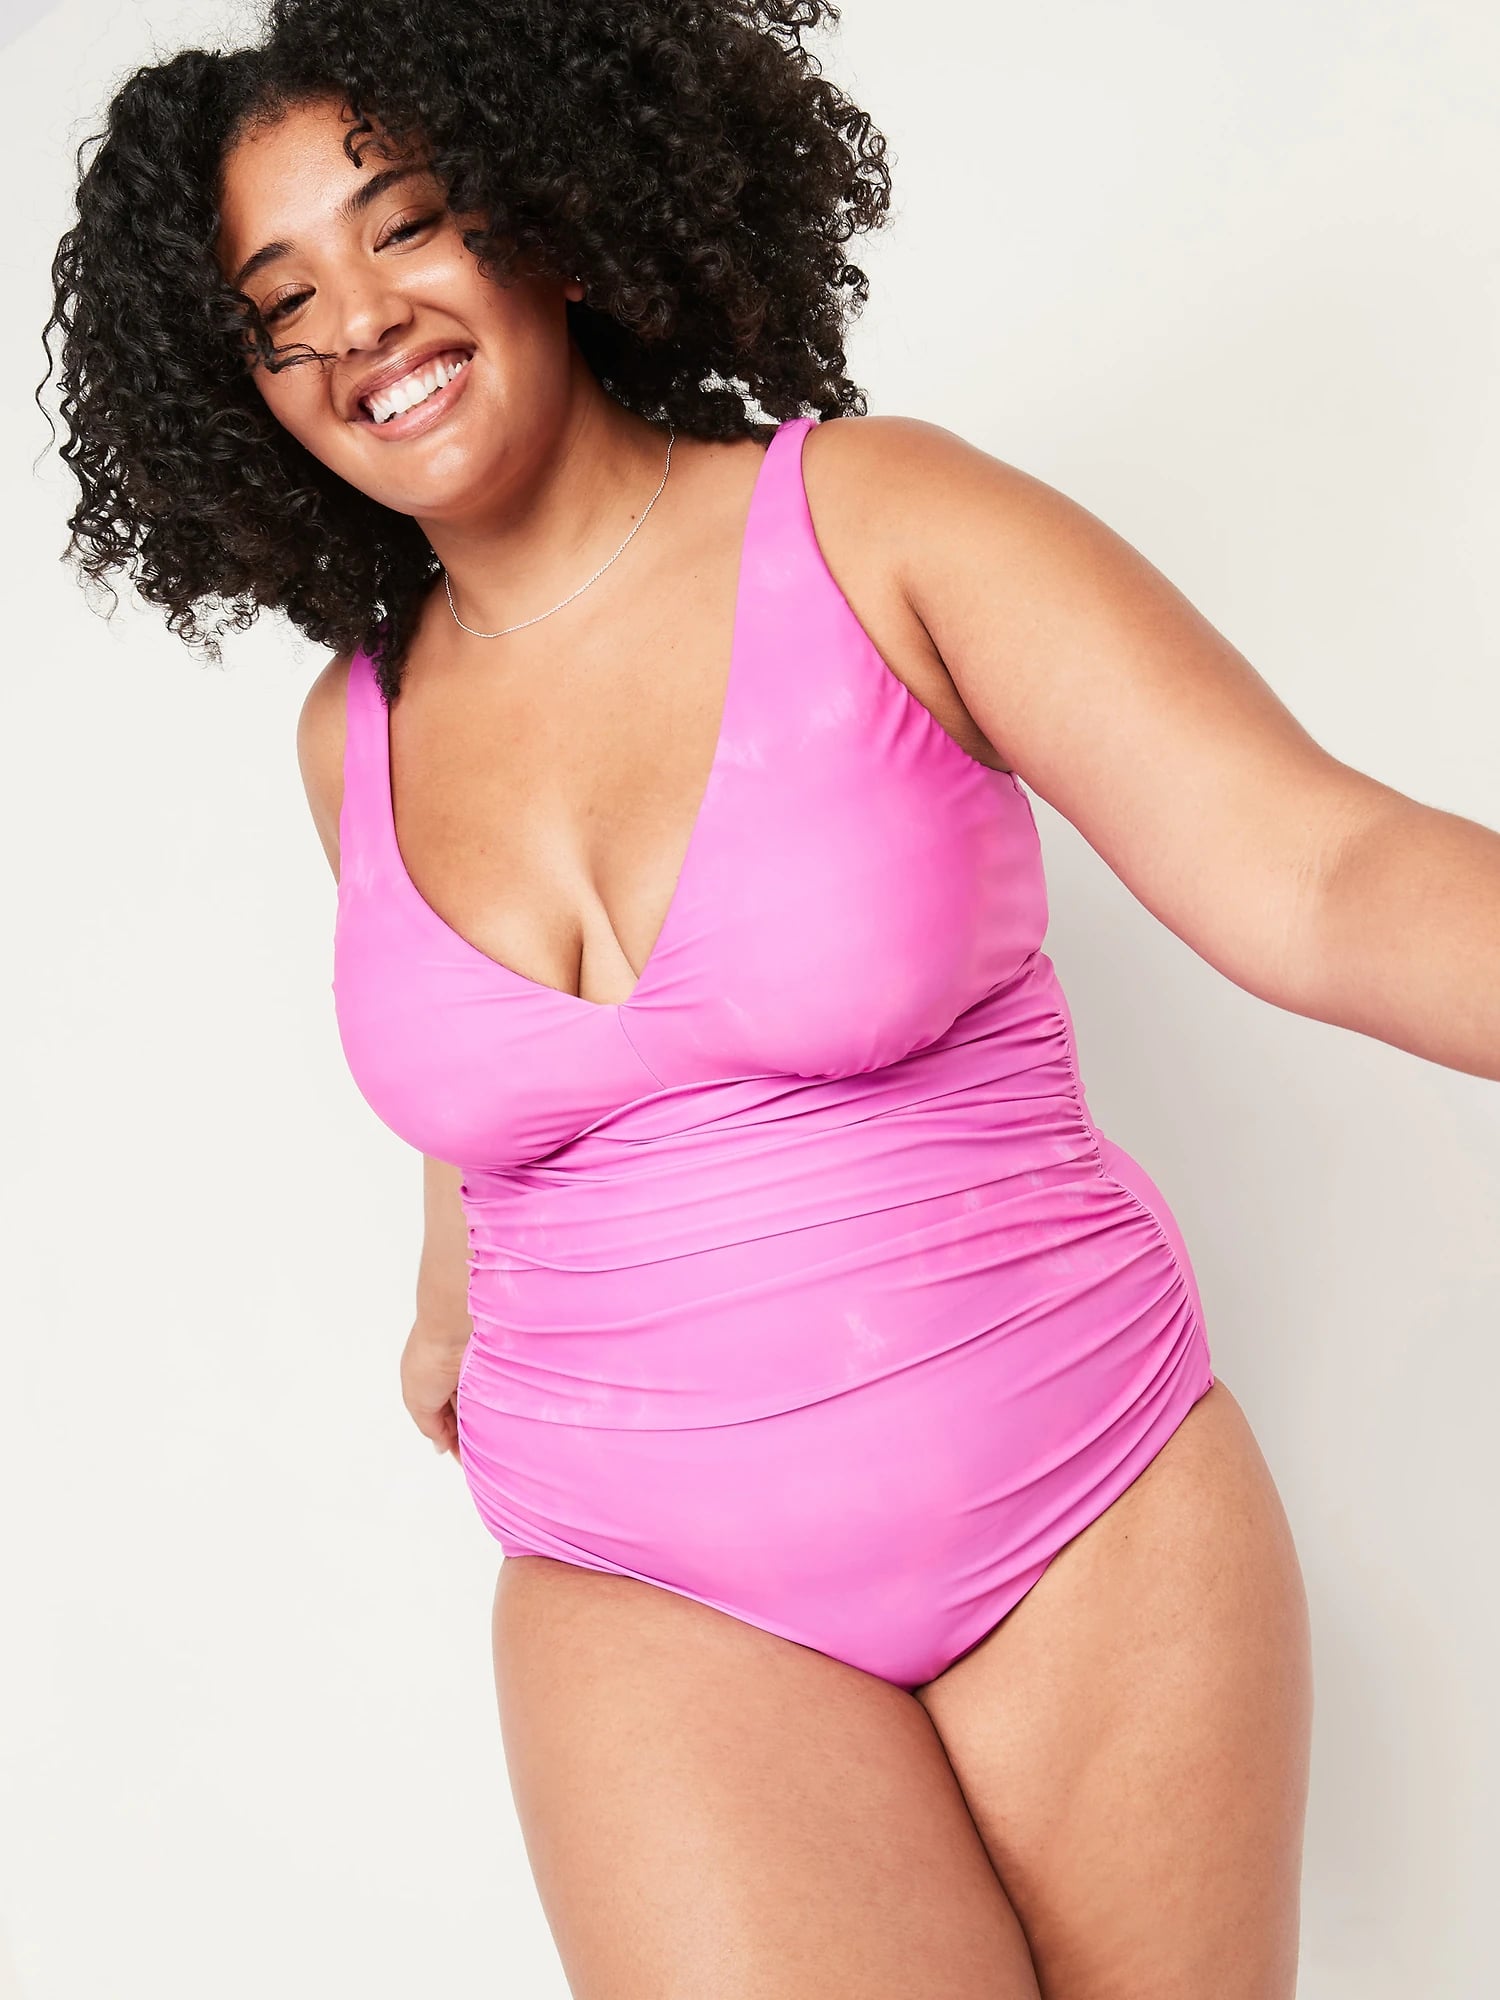 Best Plus-Size Swimsuits For Women at Old Navy